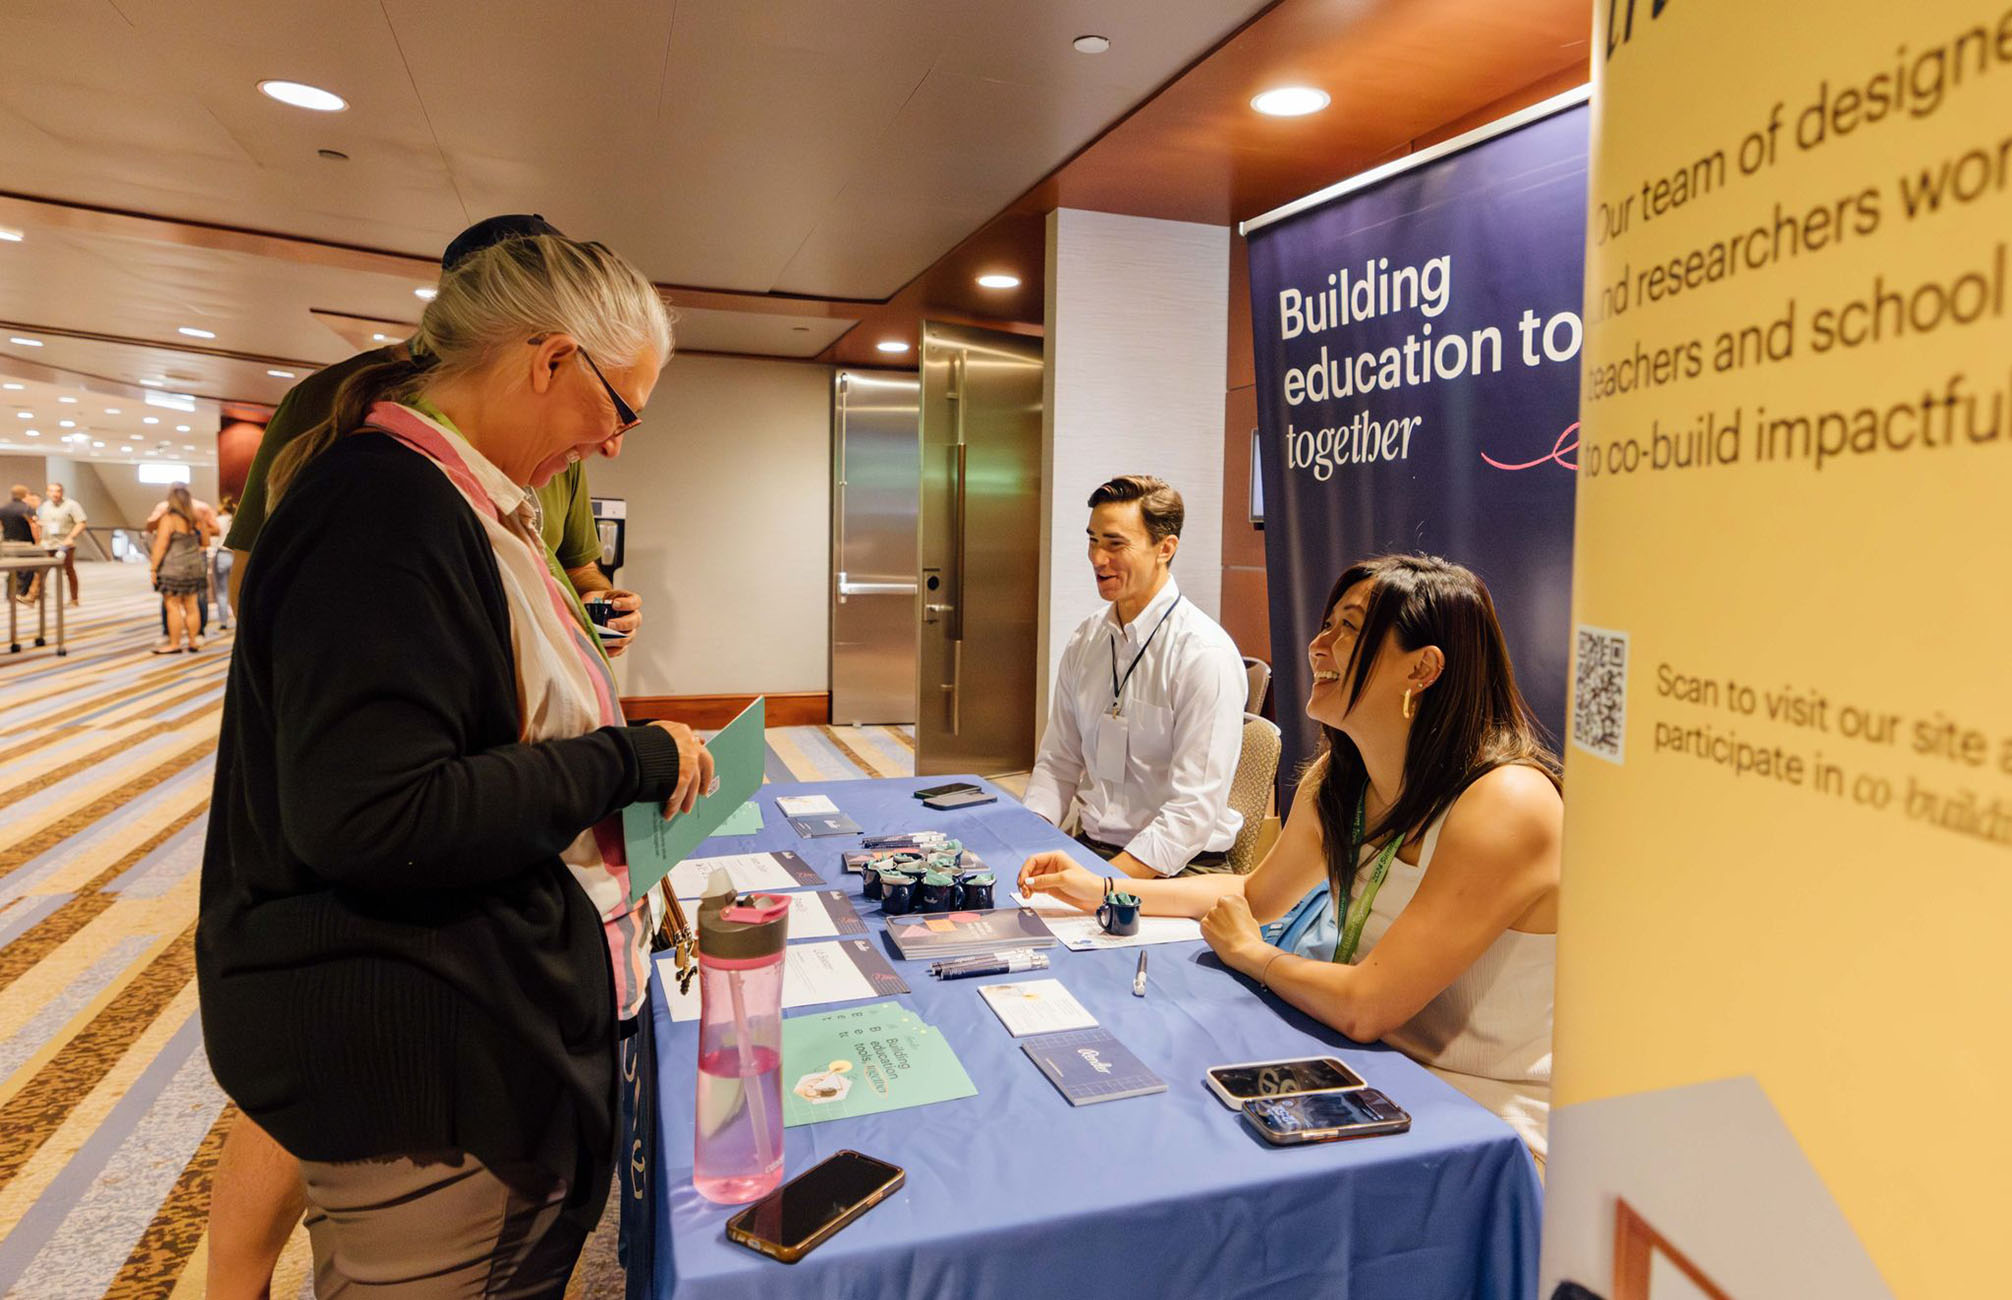 A woman standing behind a table in front of a Render Exhibit booth interacting with a man and women seated behind the table